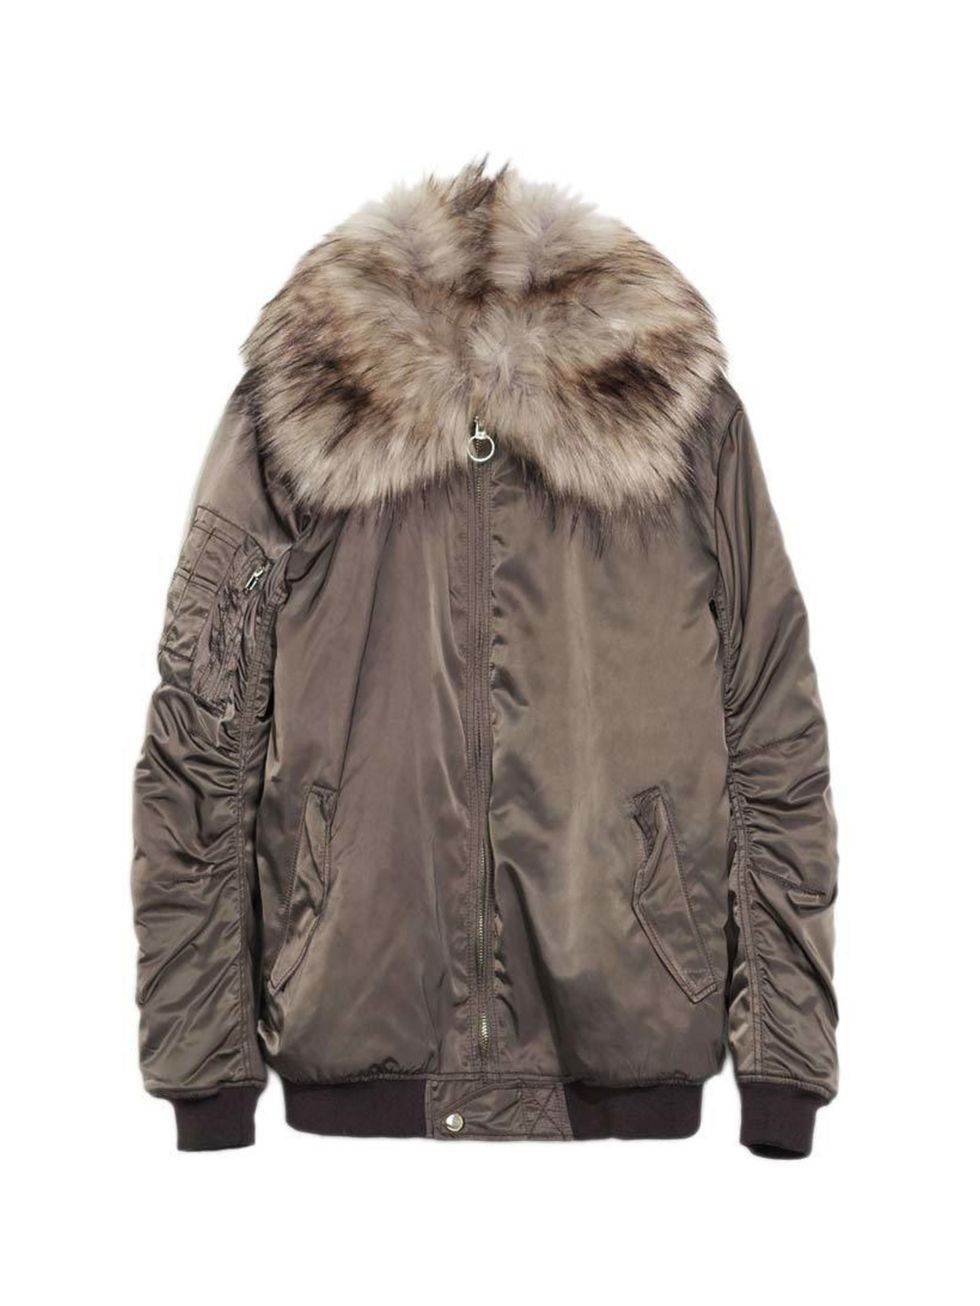 <p>The parka is the coat of the season; this one is Fashion Assistant Molly Haylor's favourite.</p>

<p> </p>

<p><a href="http://www.zara.com/uk/en/new-this-week/woman/bomber-jacket-c287002p2045047.html" target="_blank">Zara</a> parka, £89.99</p>